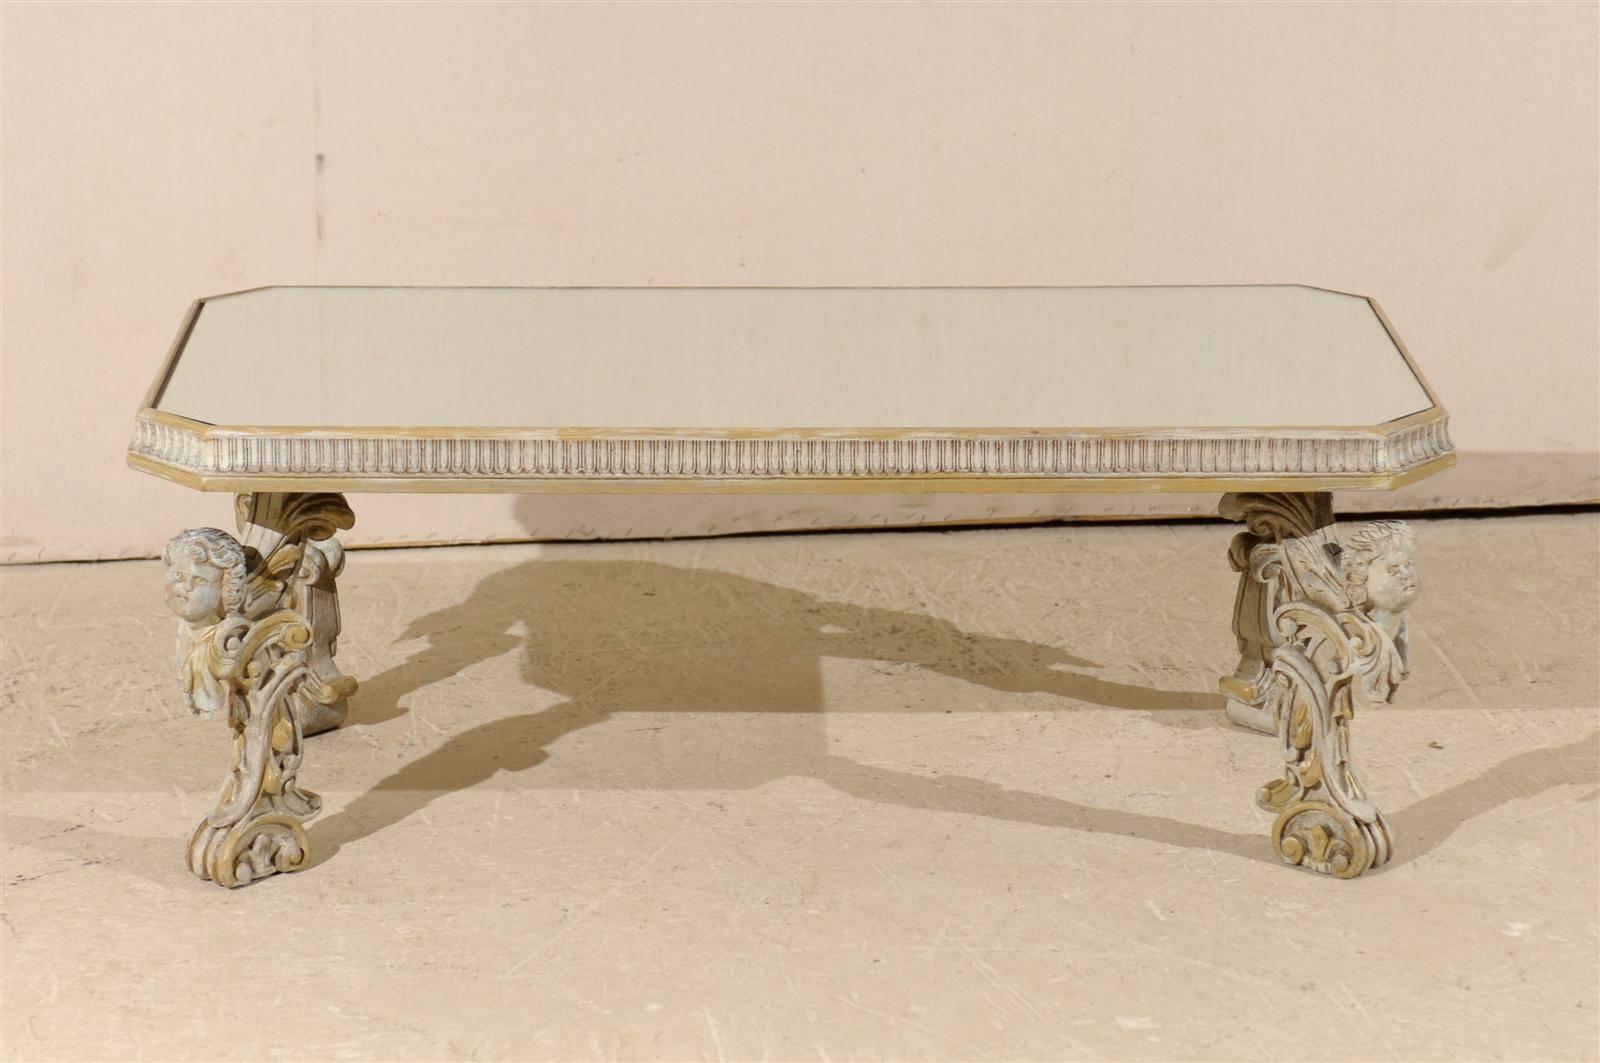 Italian Mirrored Top Coffee Table with Ornate Putti Carved Legs, Circa 1920s For Sale 1